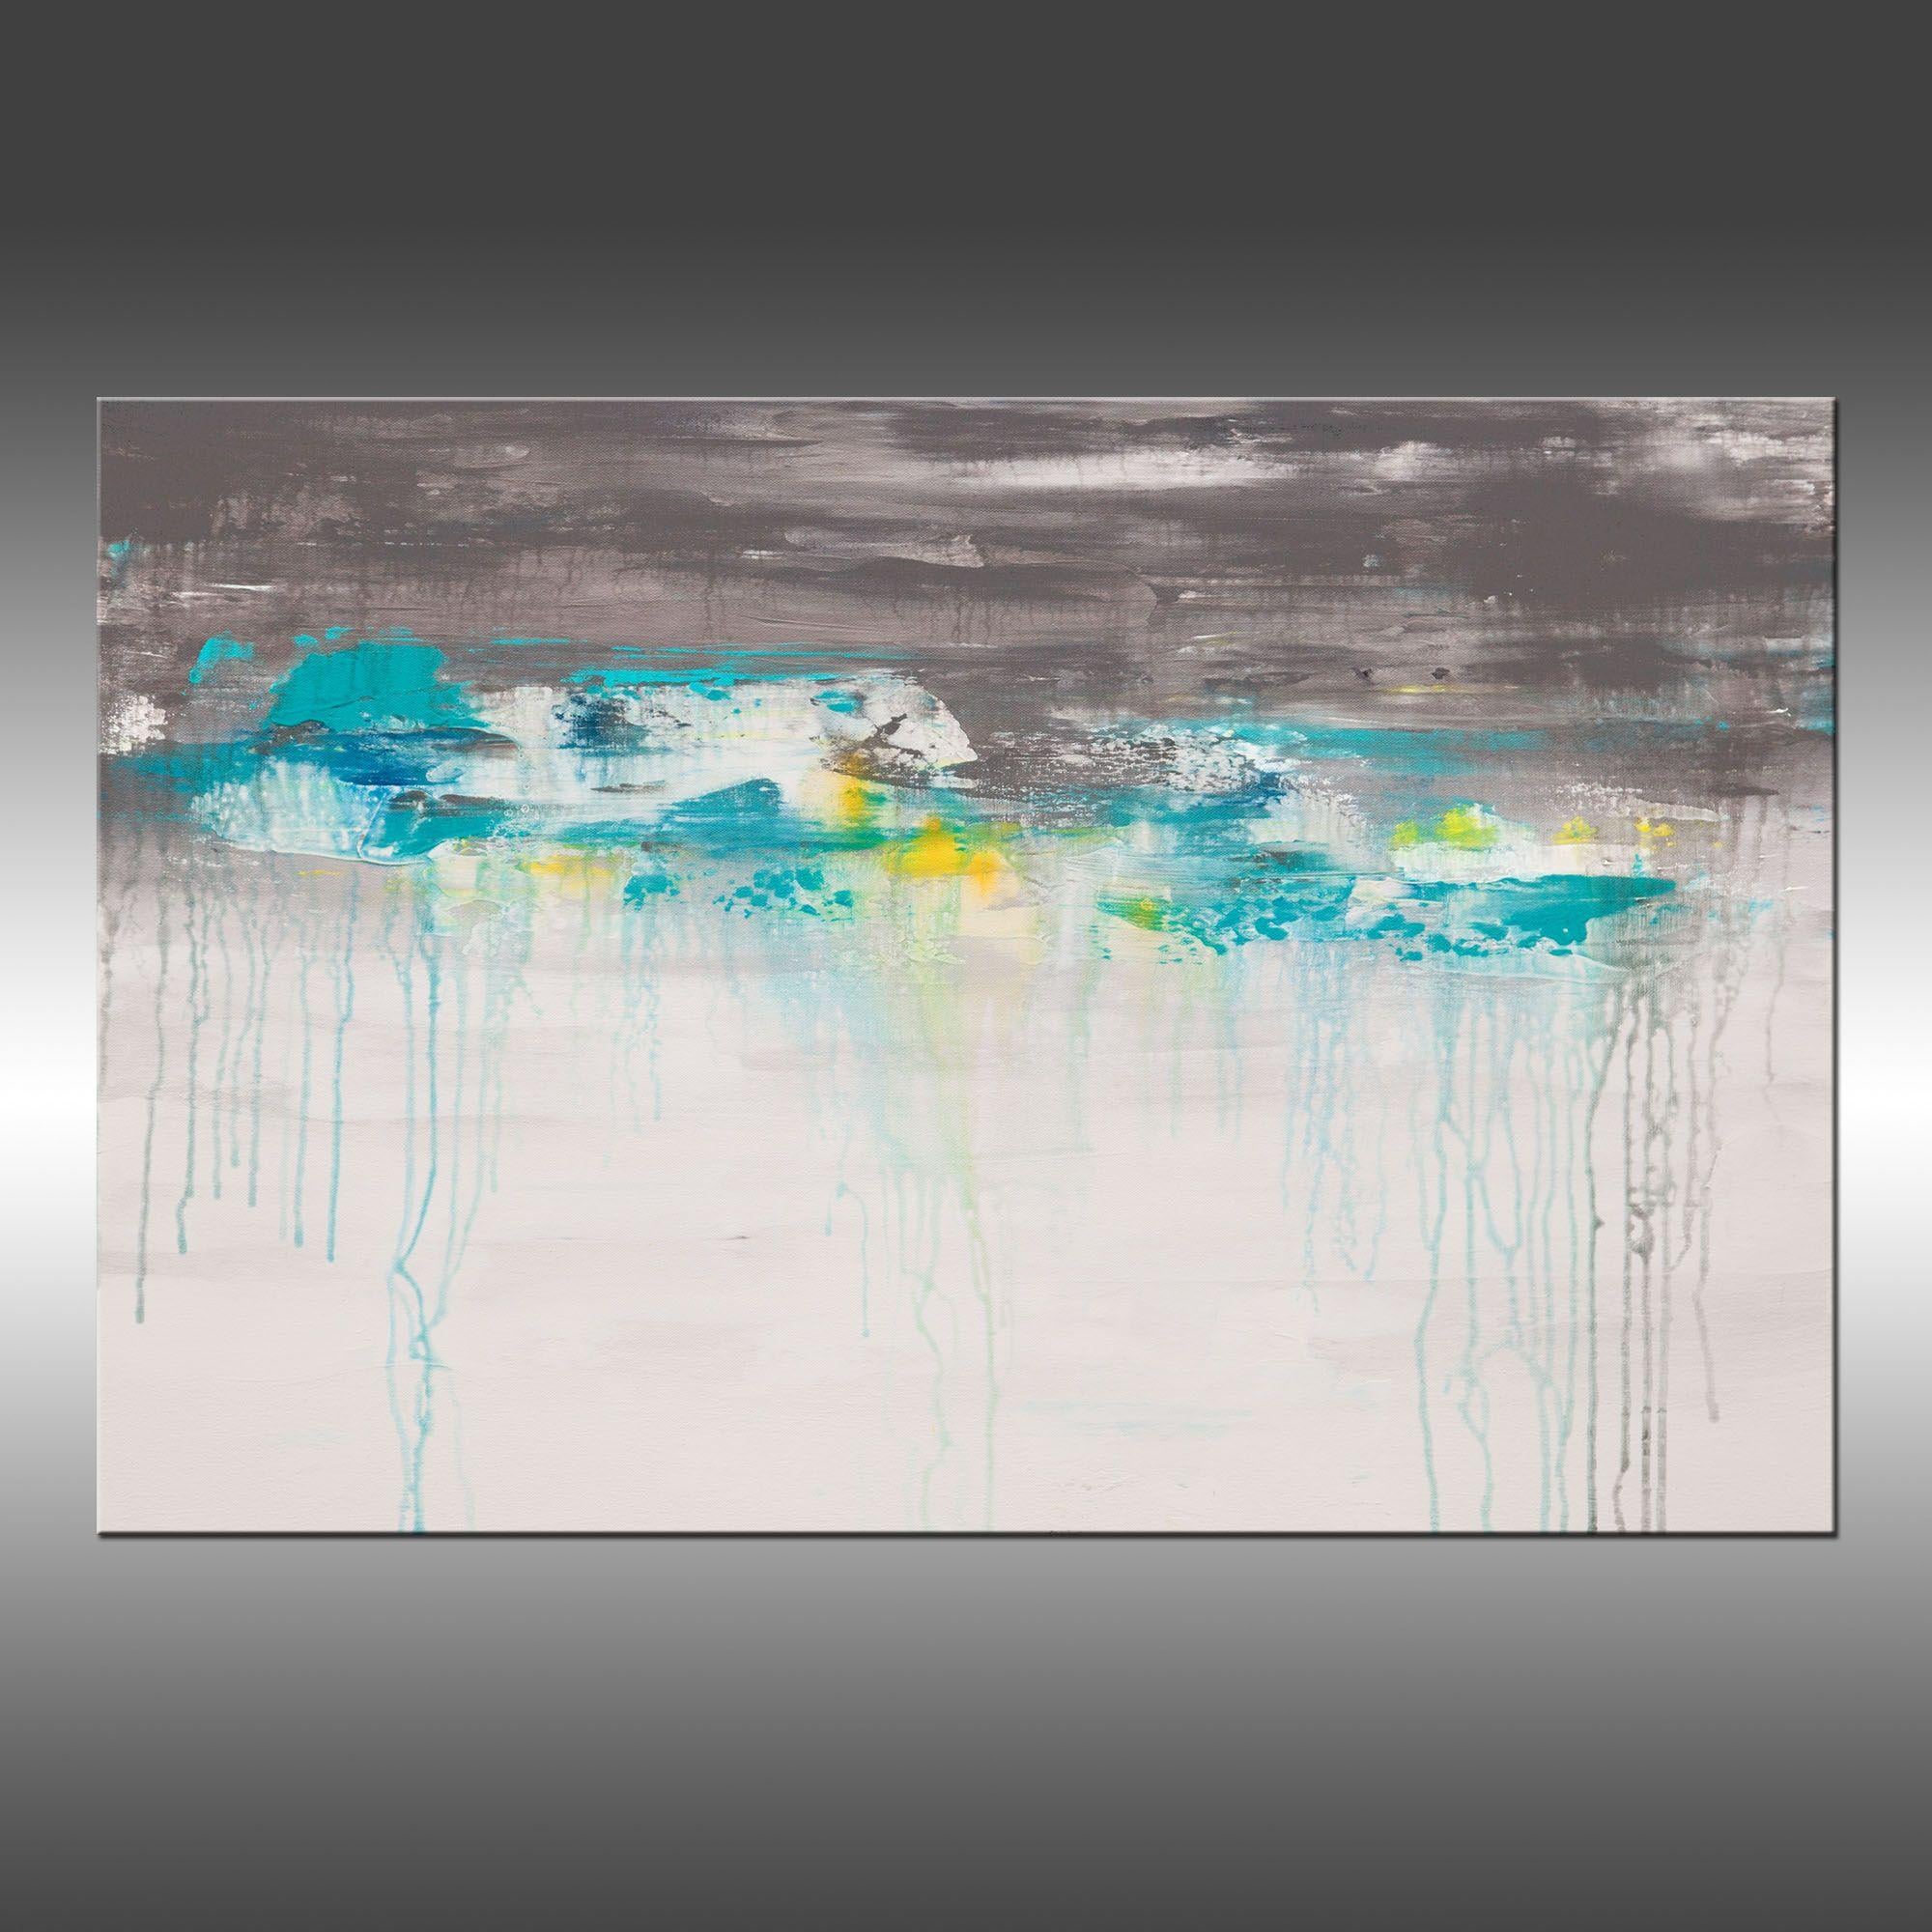 Lithosphere 175 is an original, modern art painting from the Lithosphere series. This one-of-a-kind painting was created with acrylic paint on gallery-wrapped canvas. It has a width of 36 inches and a height of 24 inches with a depth of 1.5 inches